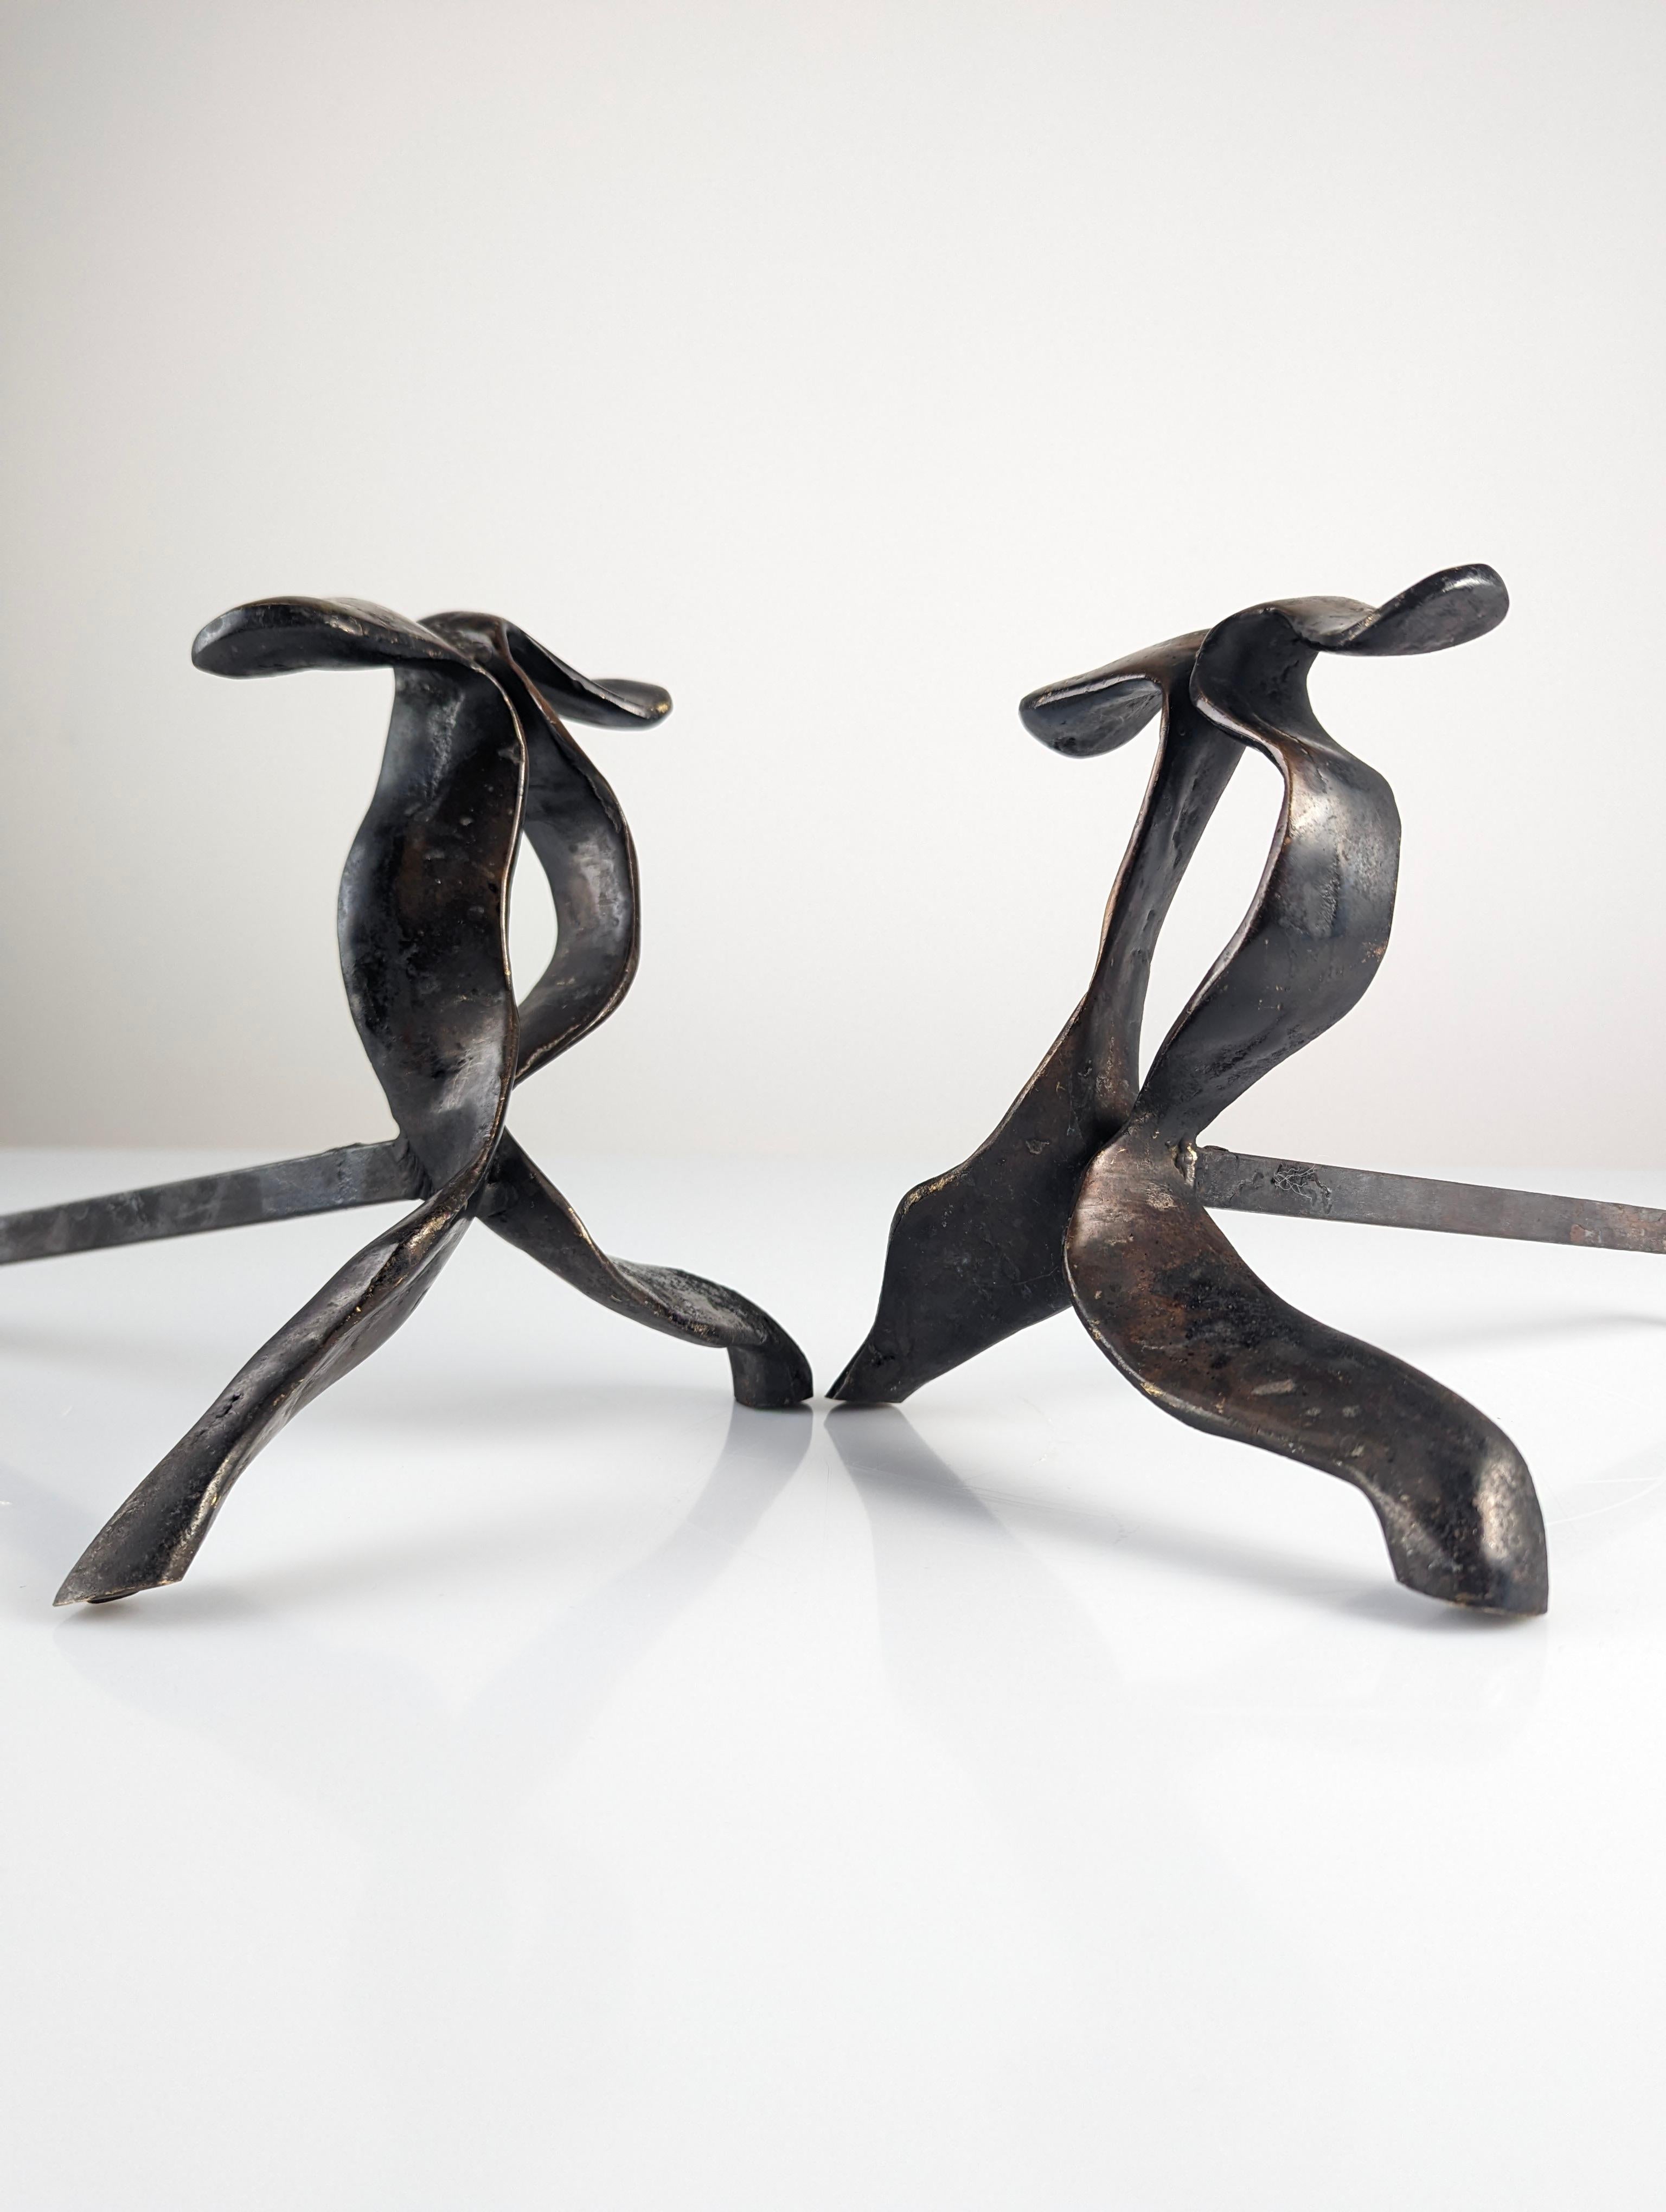 Pair of sculptural andirons for fireplace made of bronze from the 70s.

